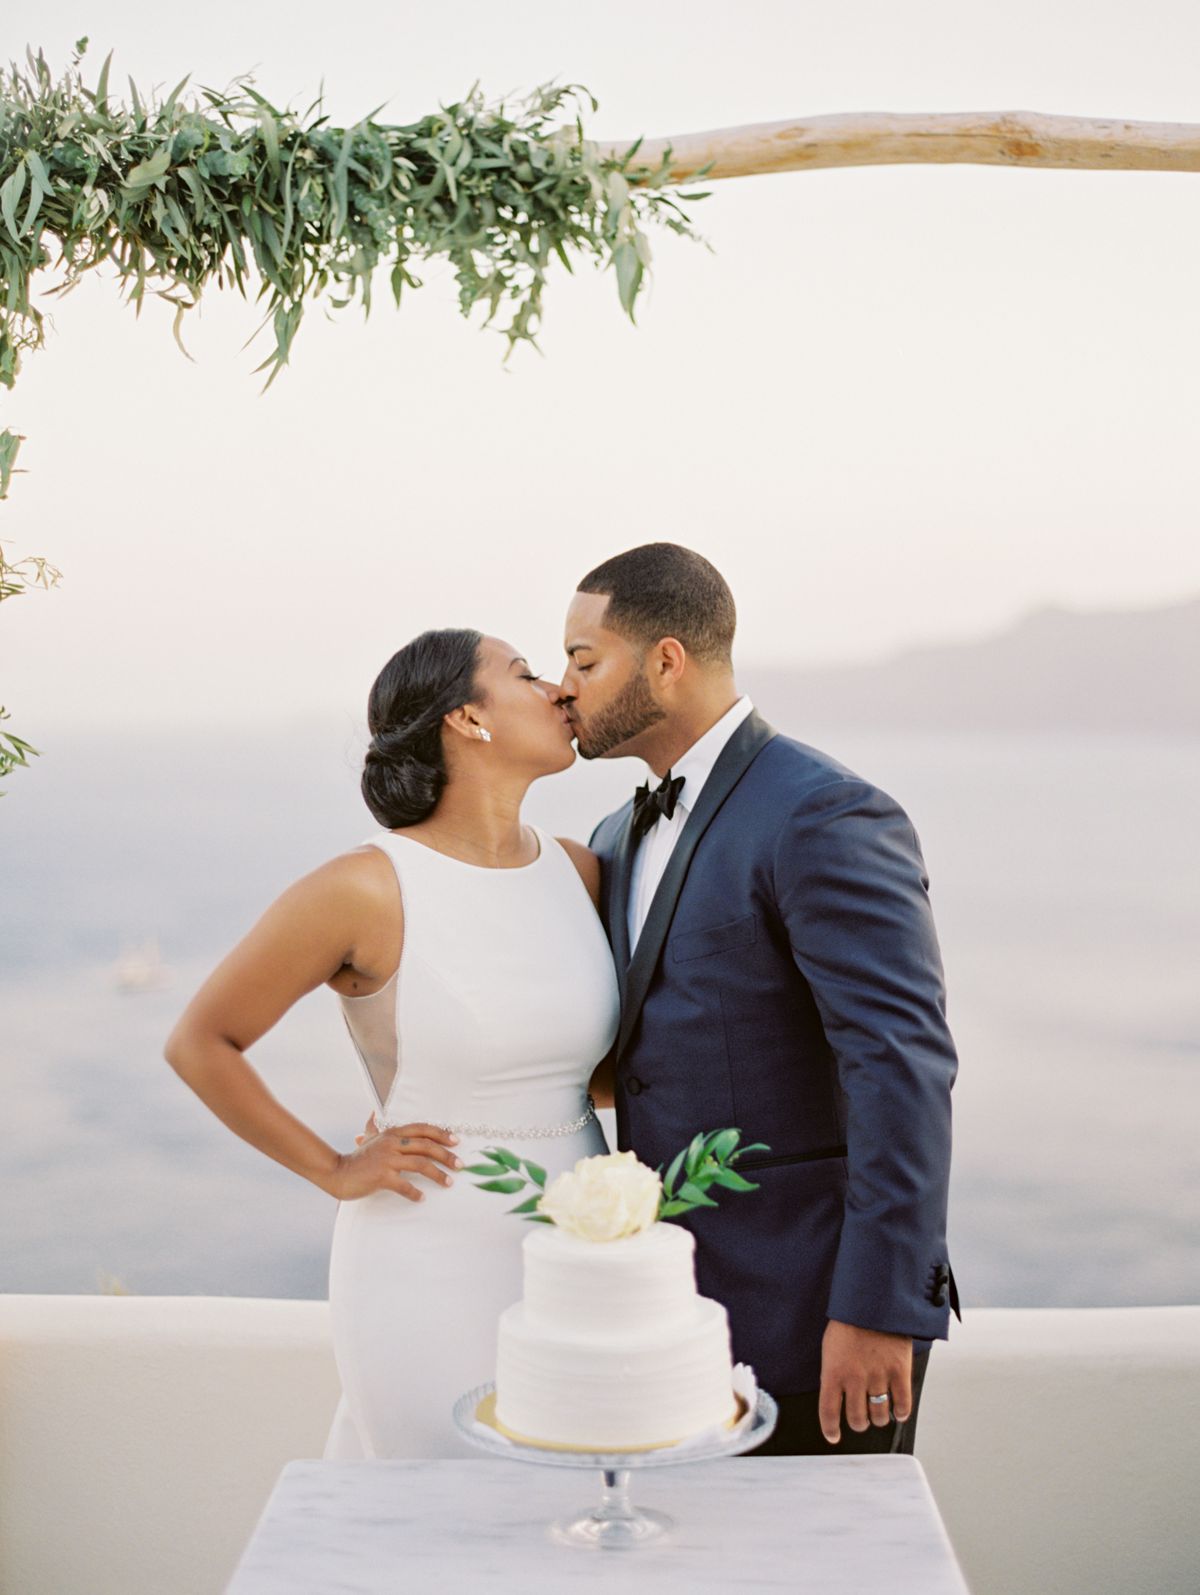 Portrait of bride and groom at Canaves Oia, Santorini during cutting cake